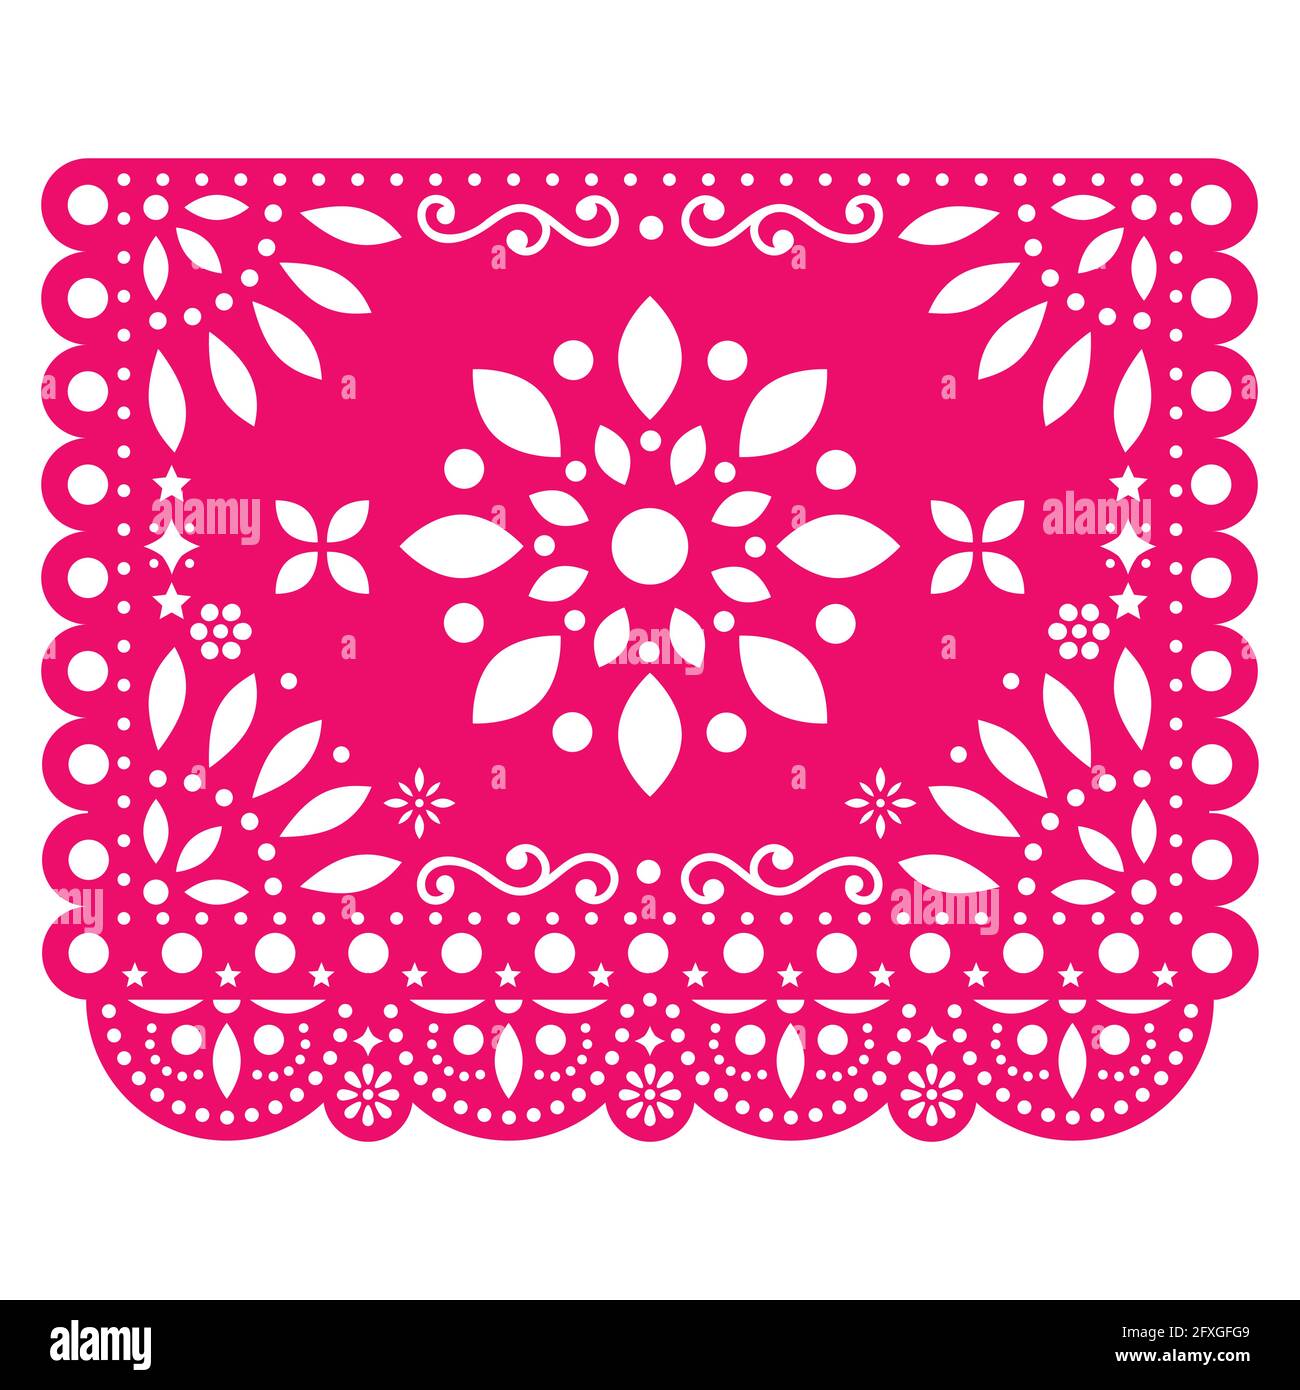 Papel Picado vector design with flower in pink Mexican paper decoration with flowers and geometric shapes Stock Vector